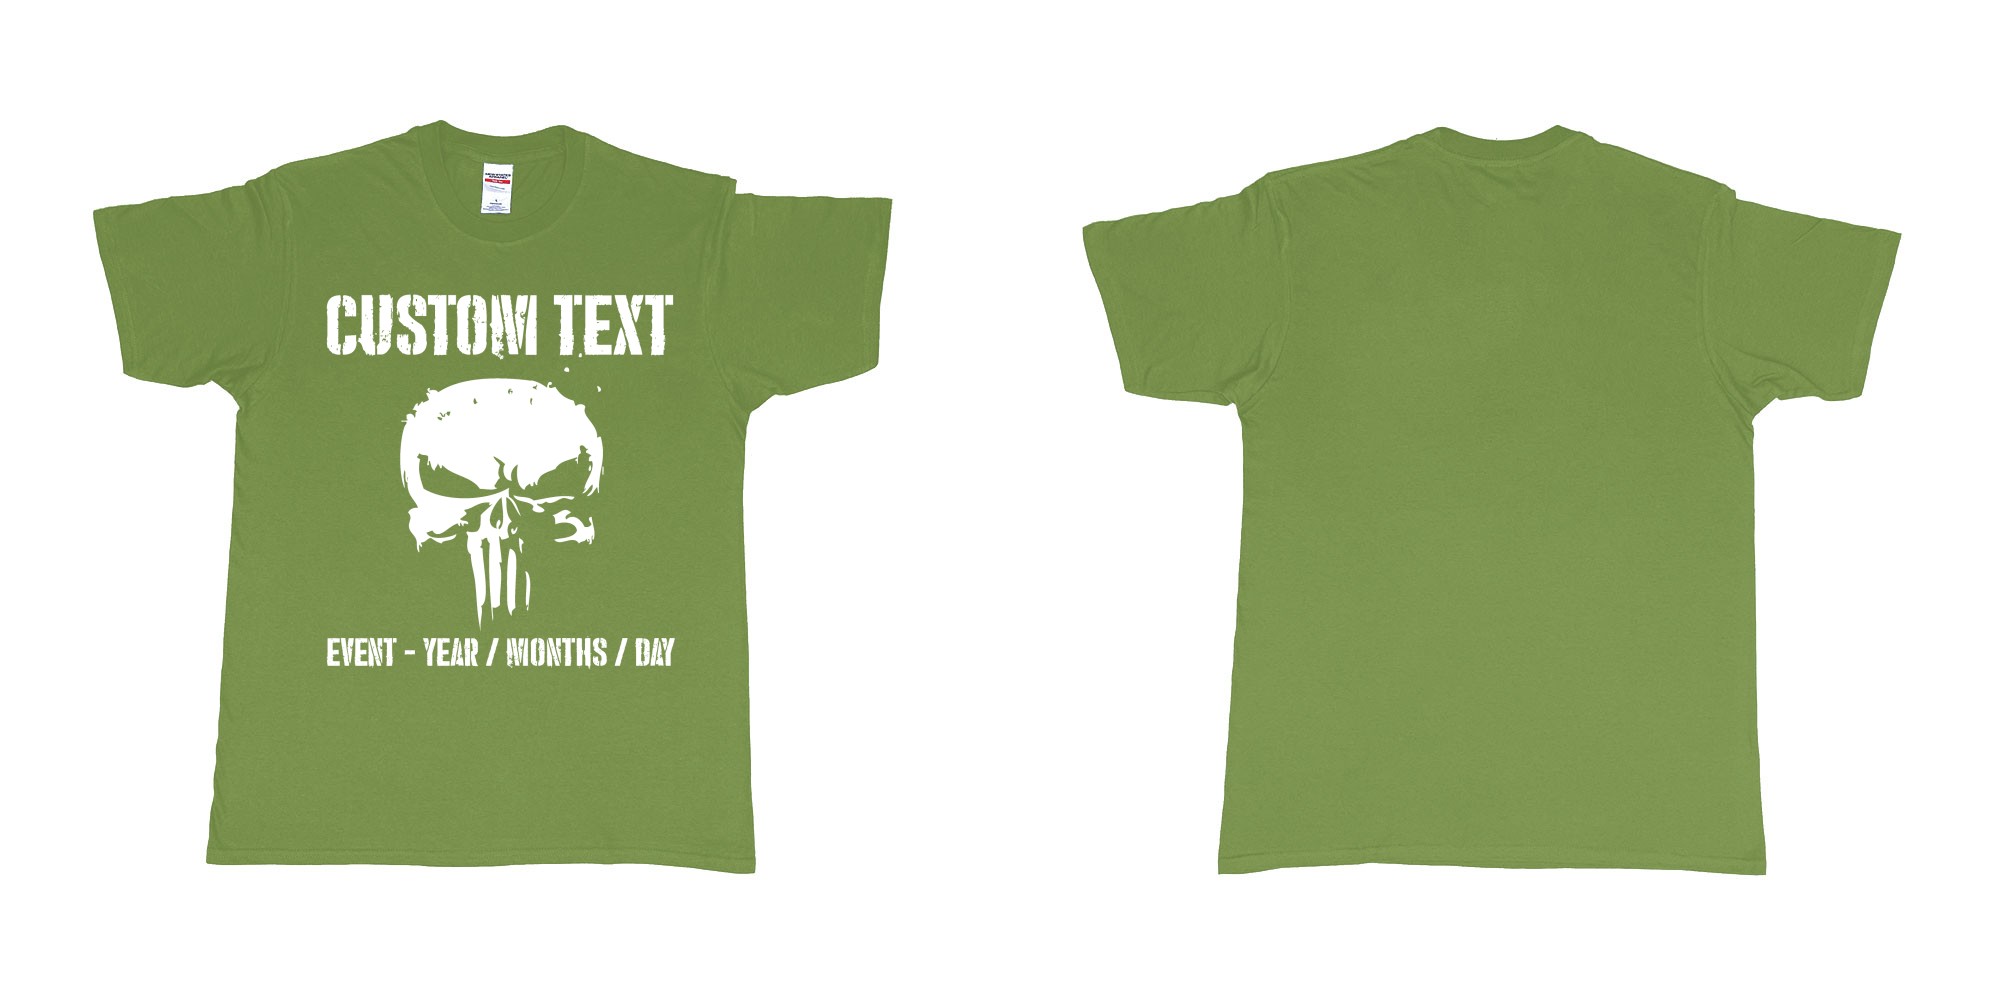 Custom tshirt design the punisher scull logo custom text in fabric color military-green choice your own text made in Bali by The Pirate Way